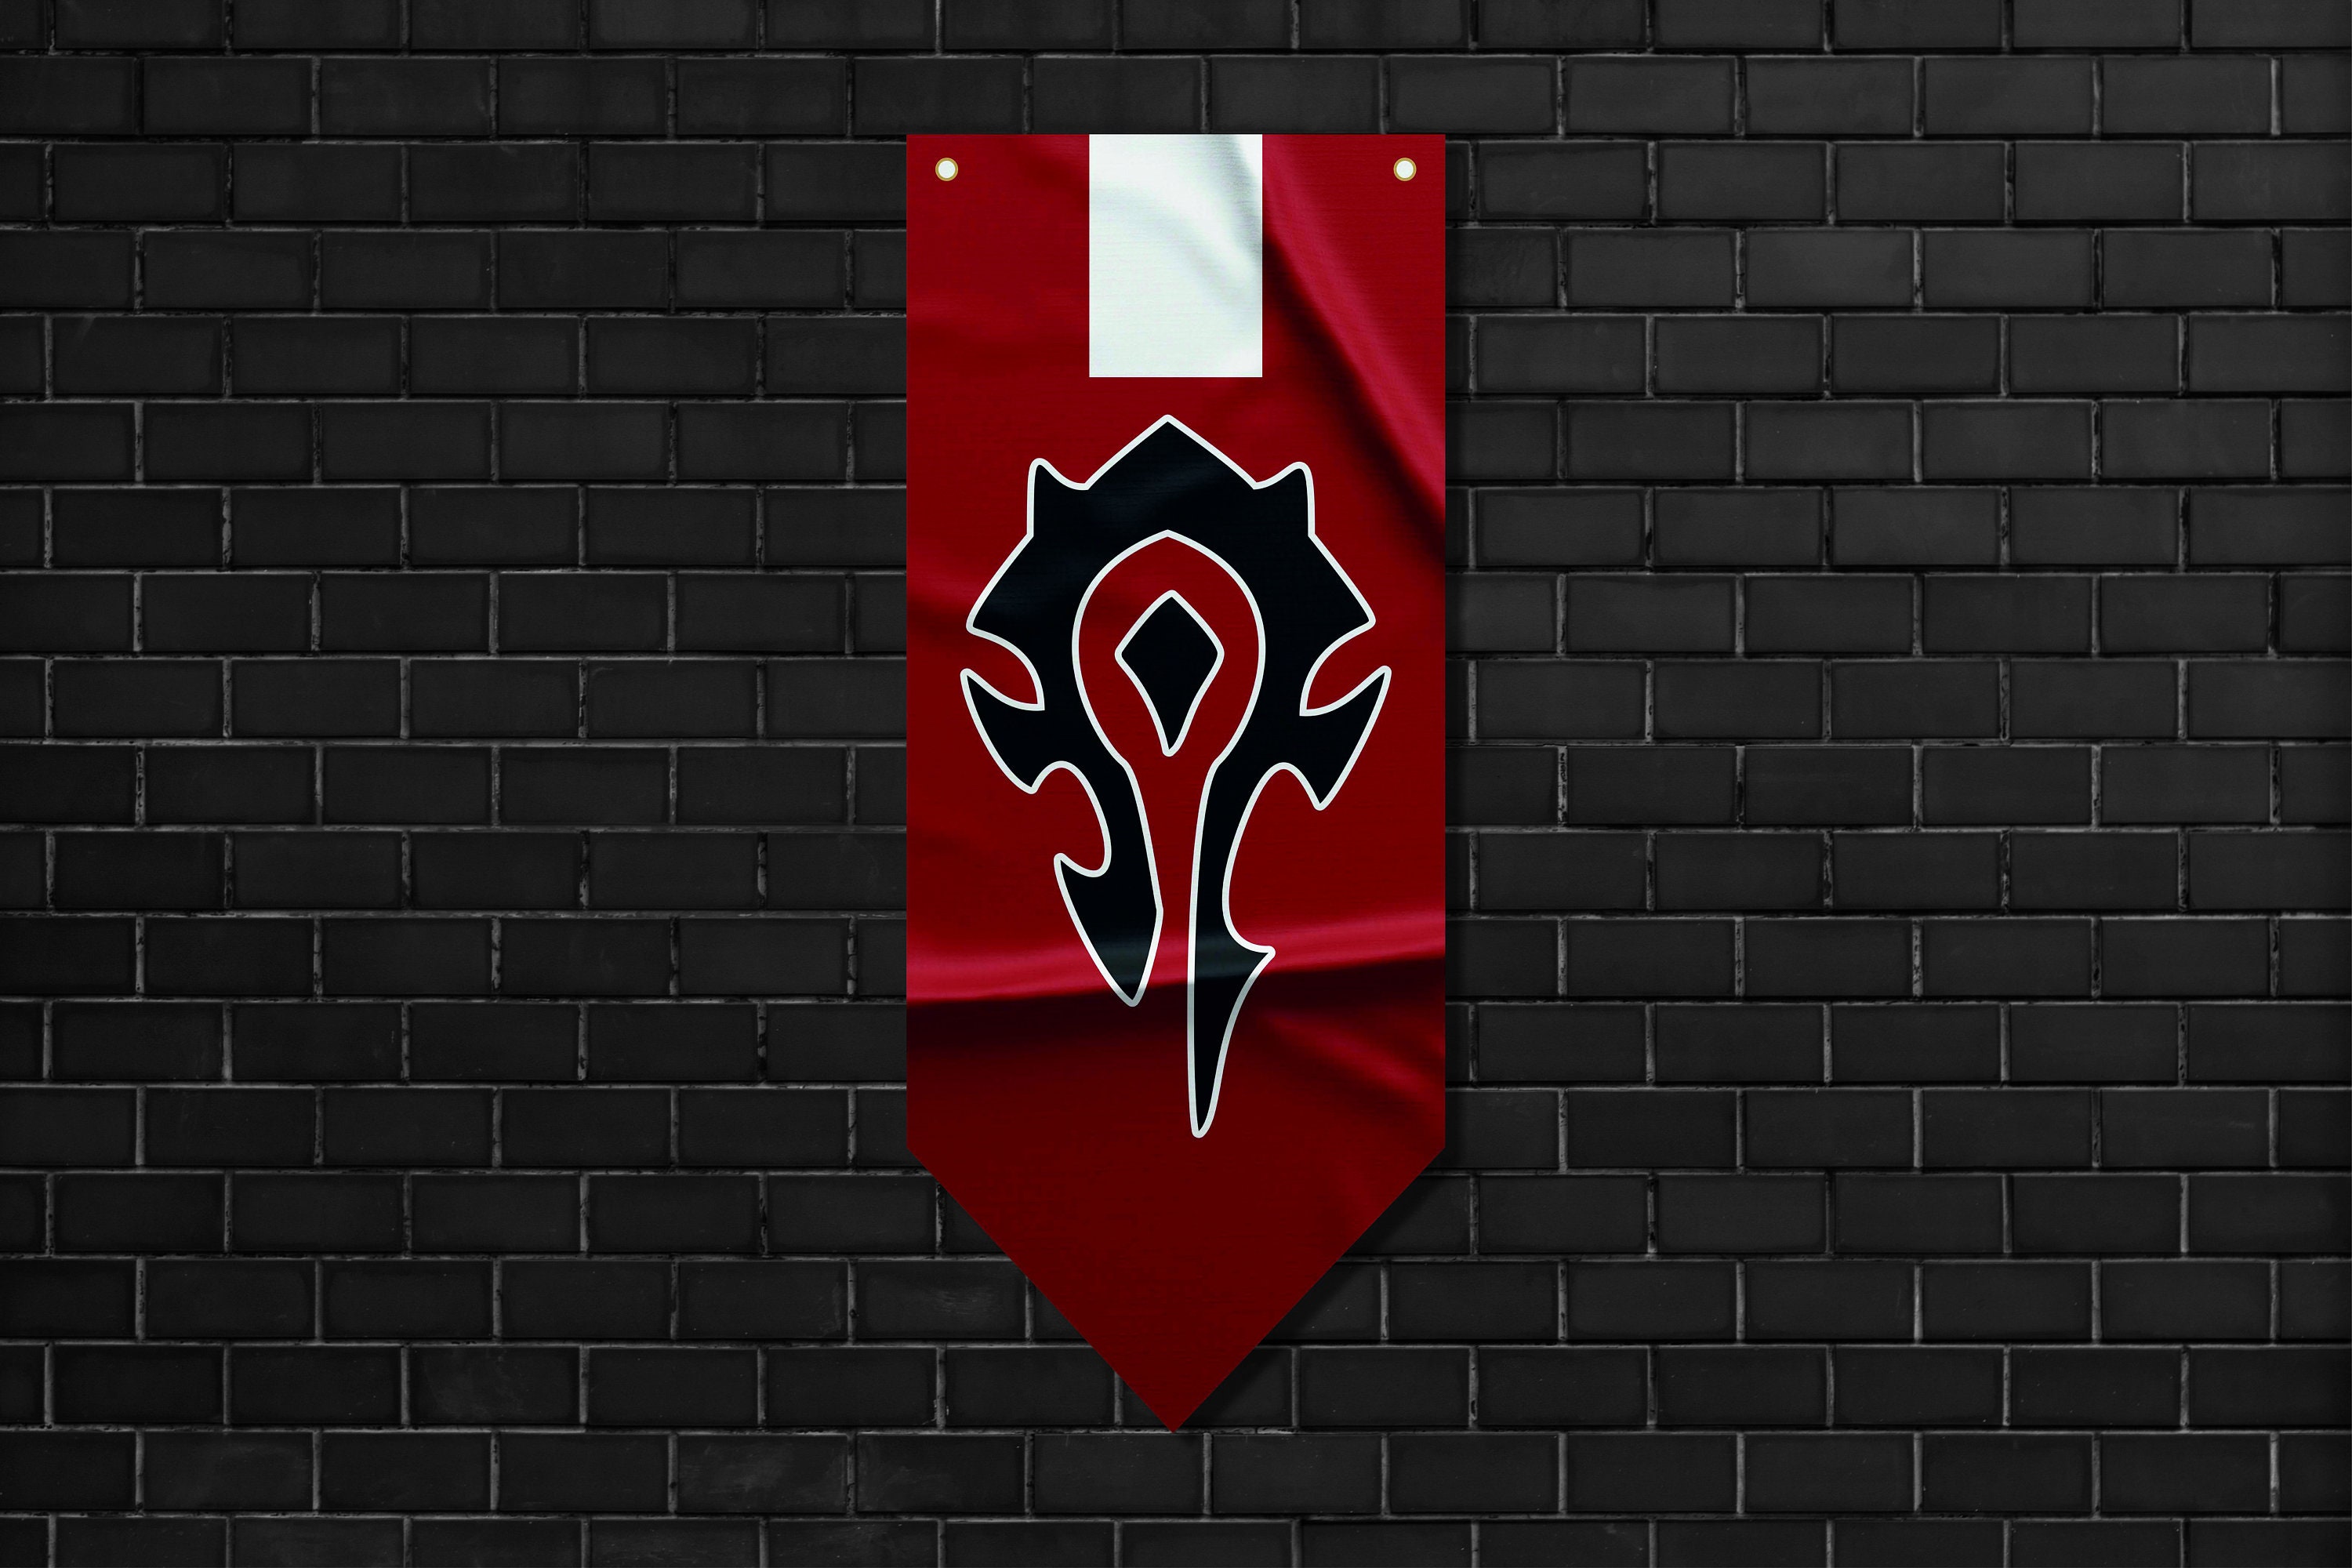 World of Warcraft - Horde Shield  Collectible retro metal signs for your  wall